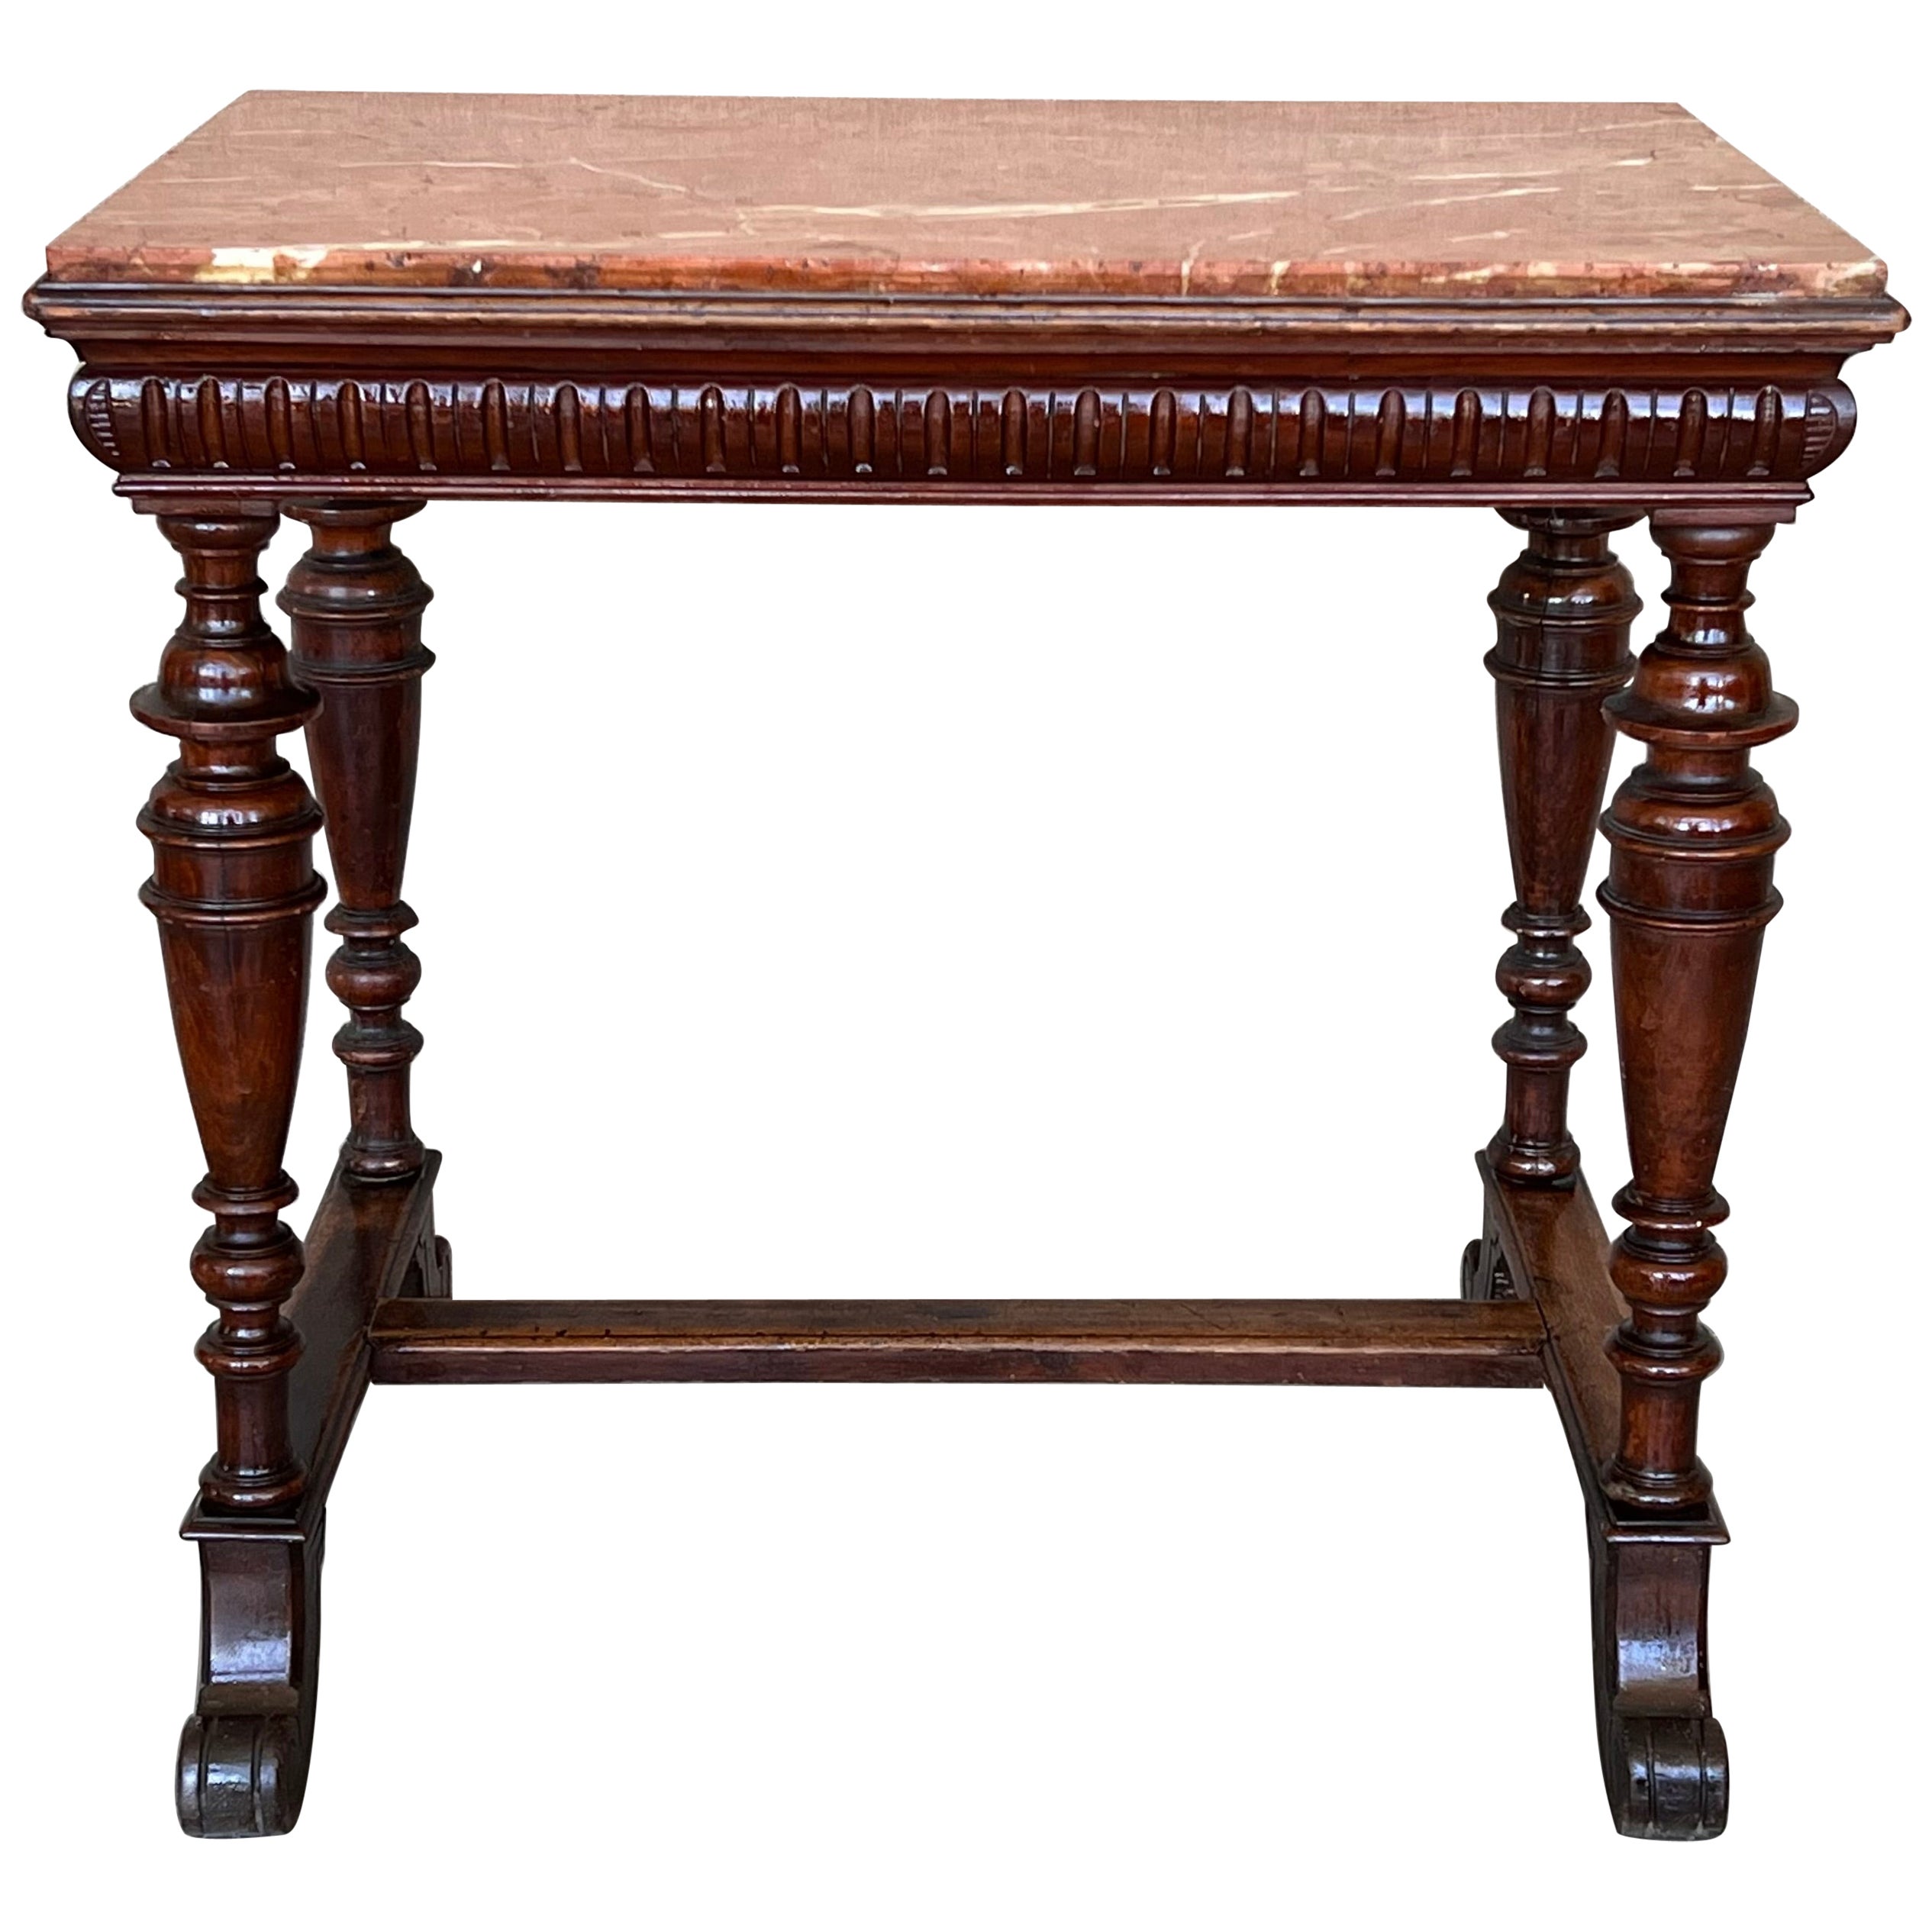 Italian 1800s Neoclassical Walnut Side Table with Marble Top and Carved Decor